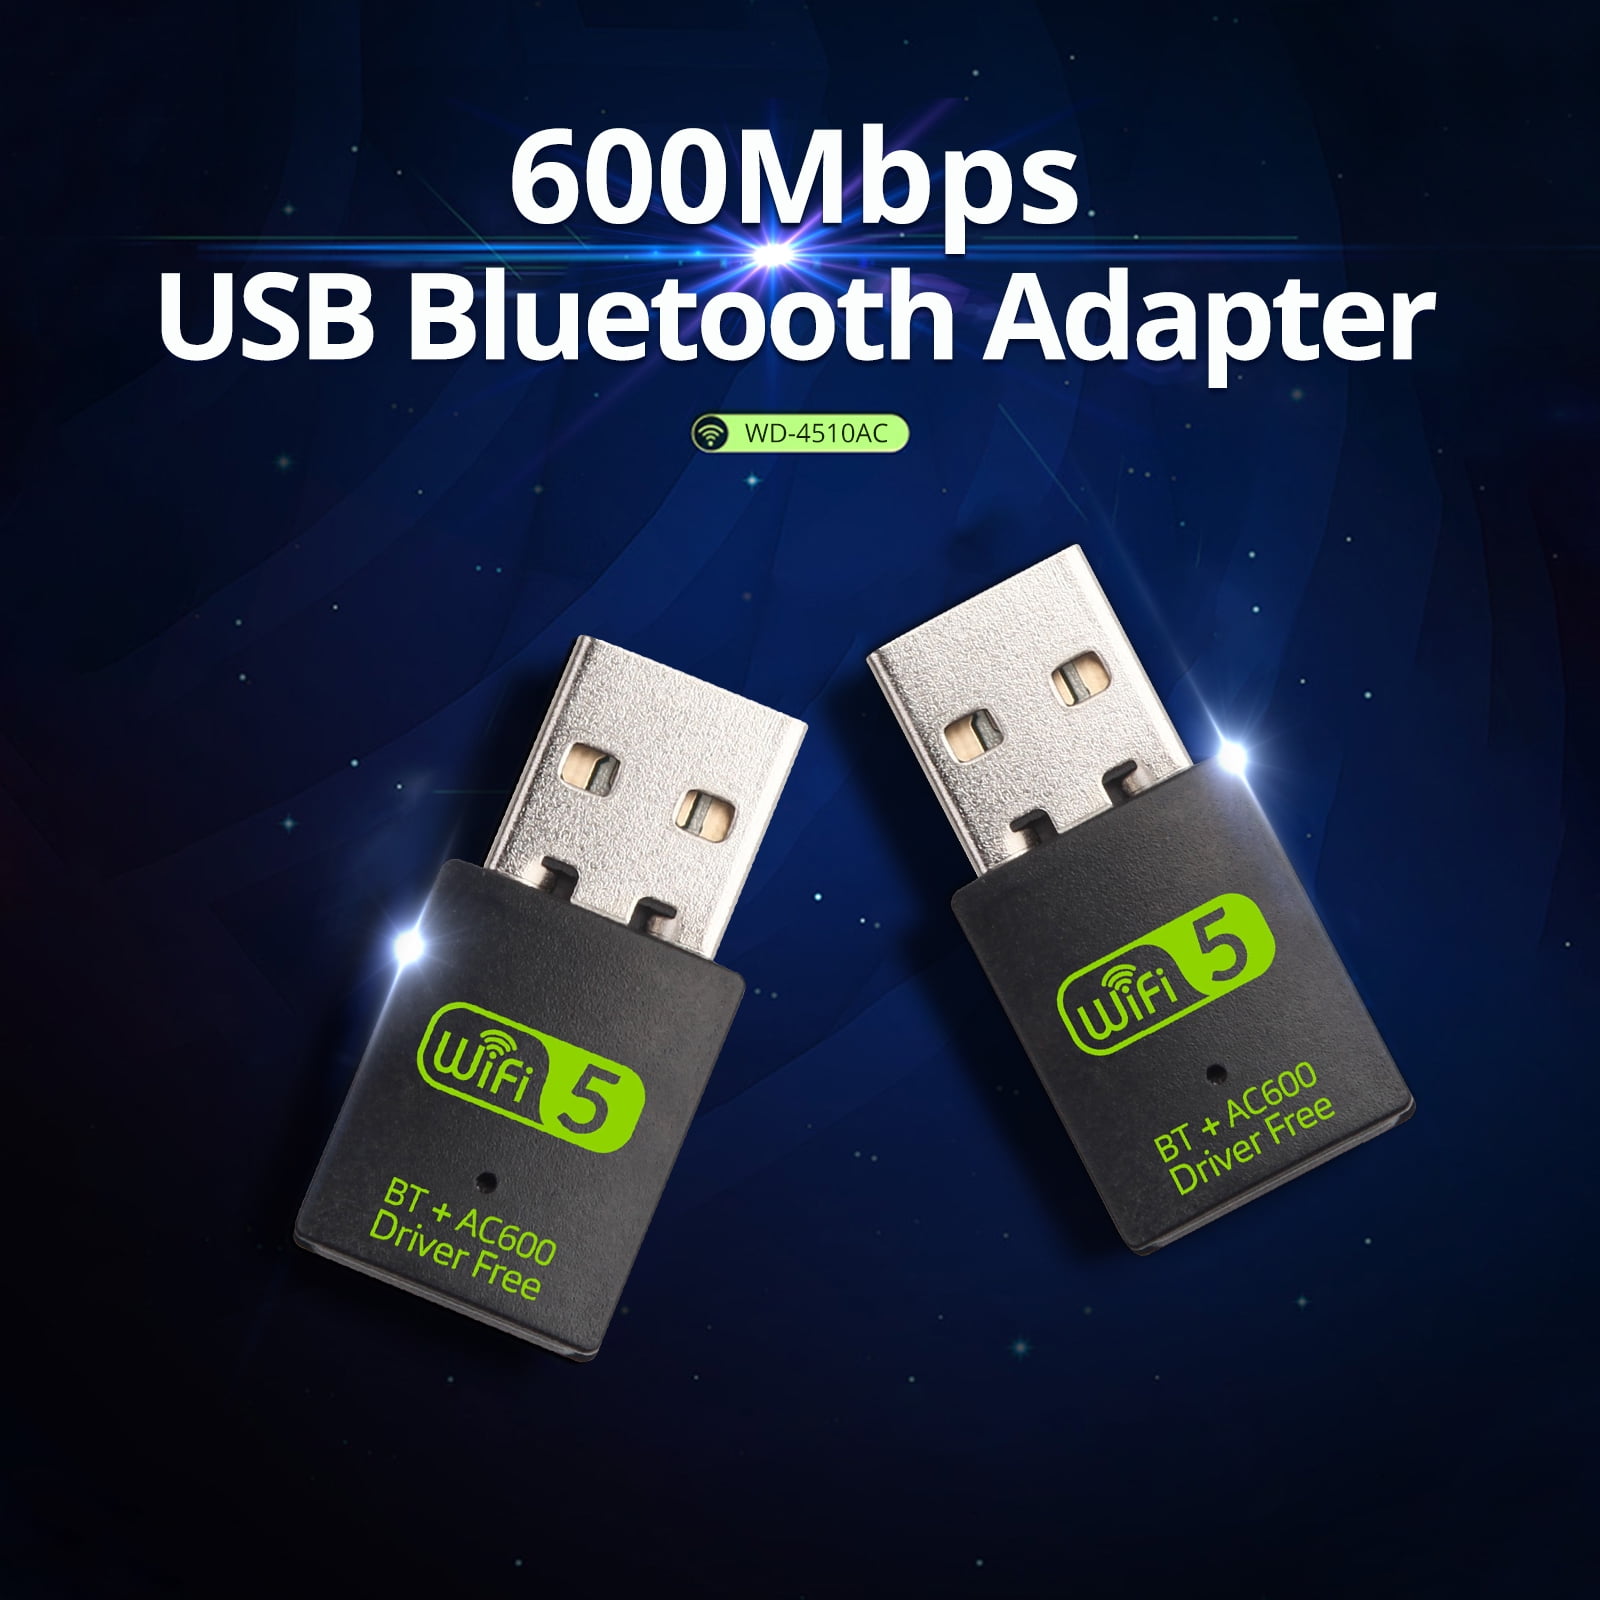 USB WiFi Adapter, Bluetooth Adapter, 600Mbps Dual Band 2.4